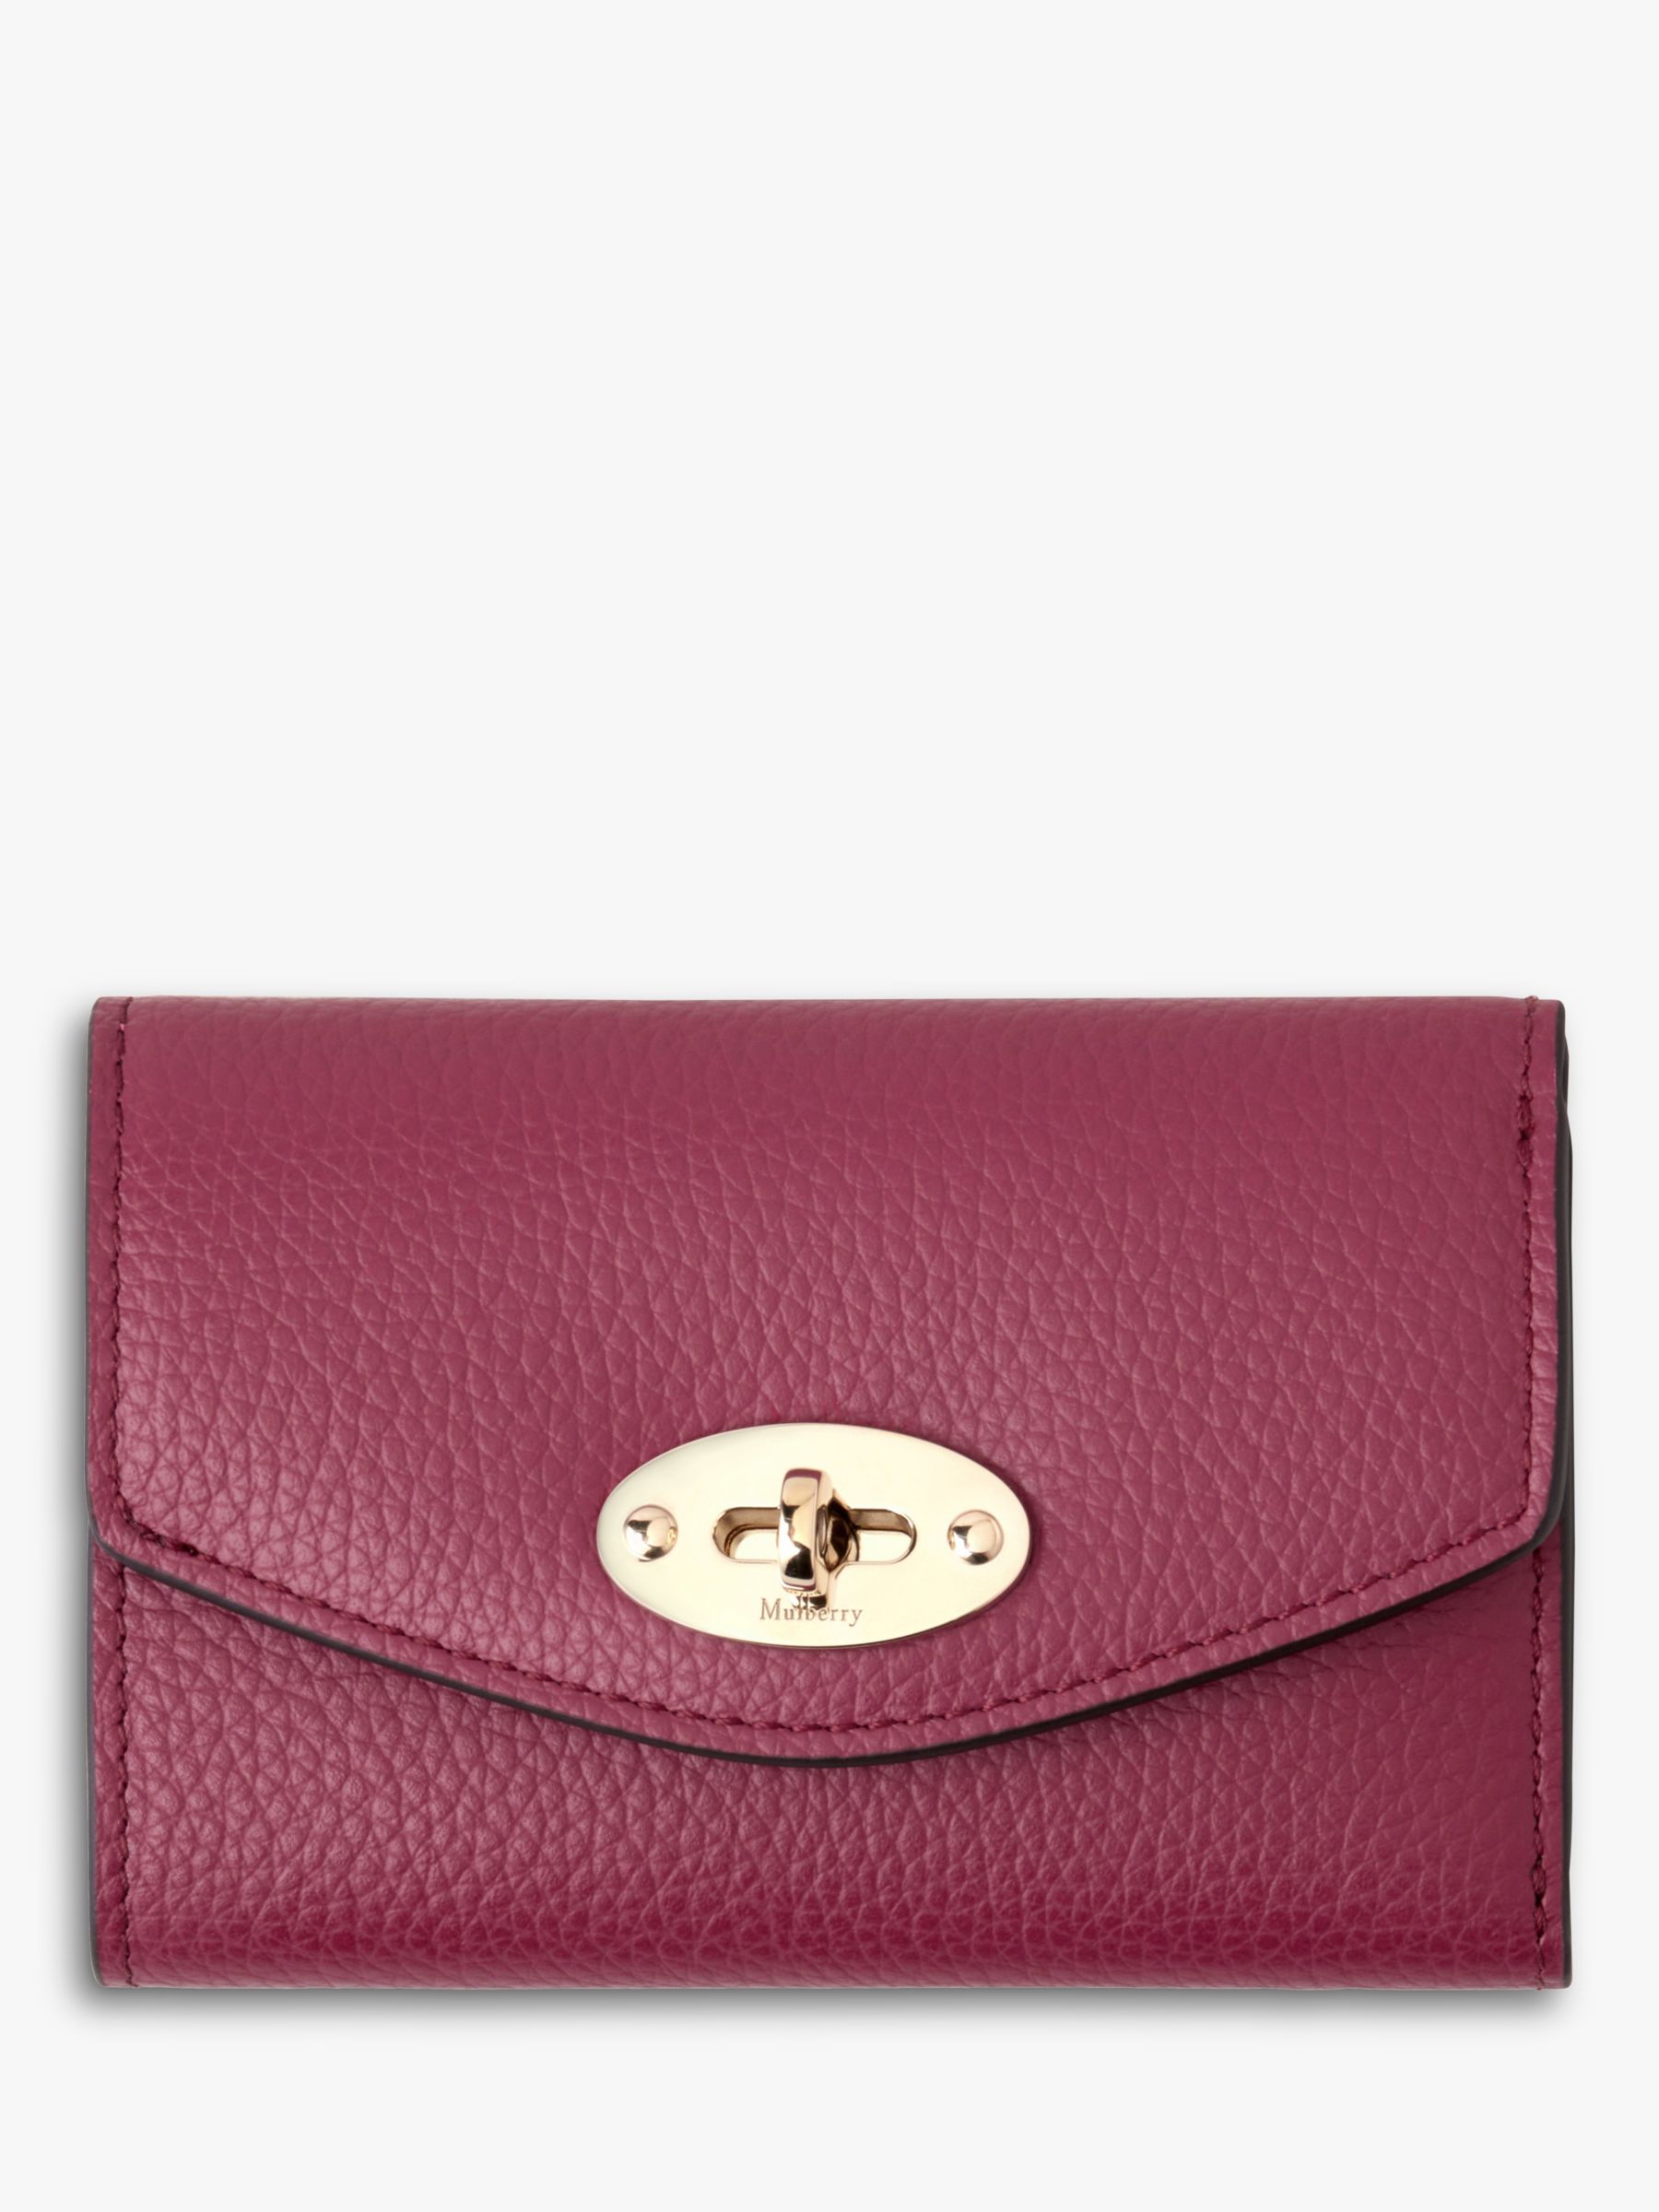 Mulberry Darley High Shine Leather Folded Multi-Card Wallet, Wild Berry ...